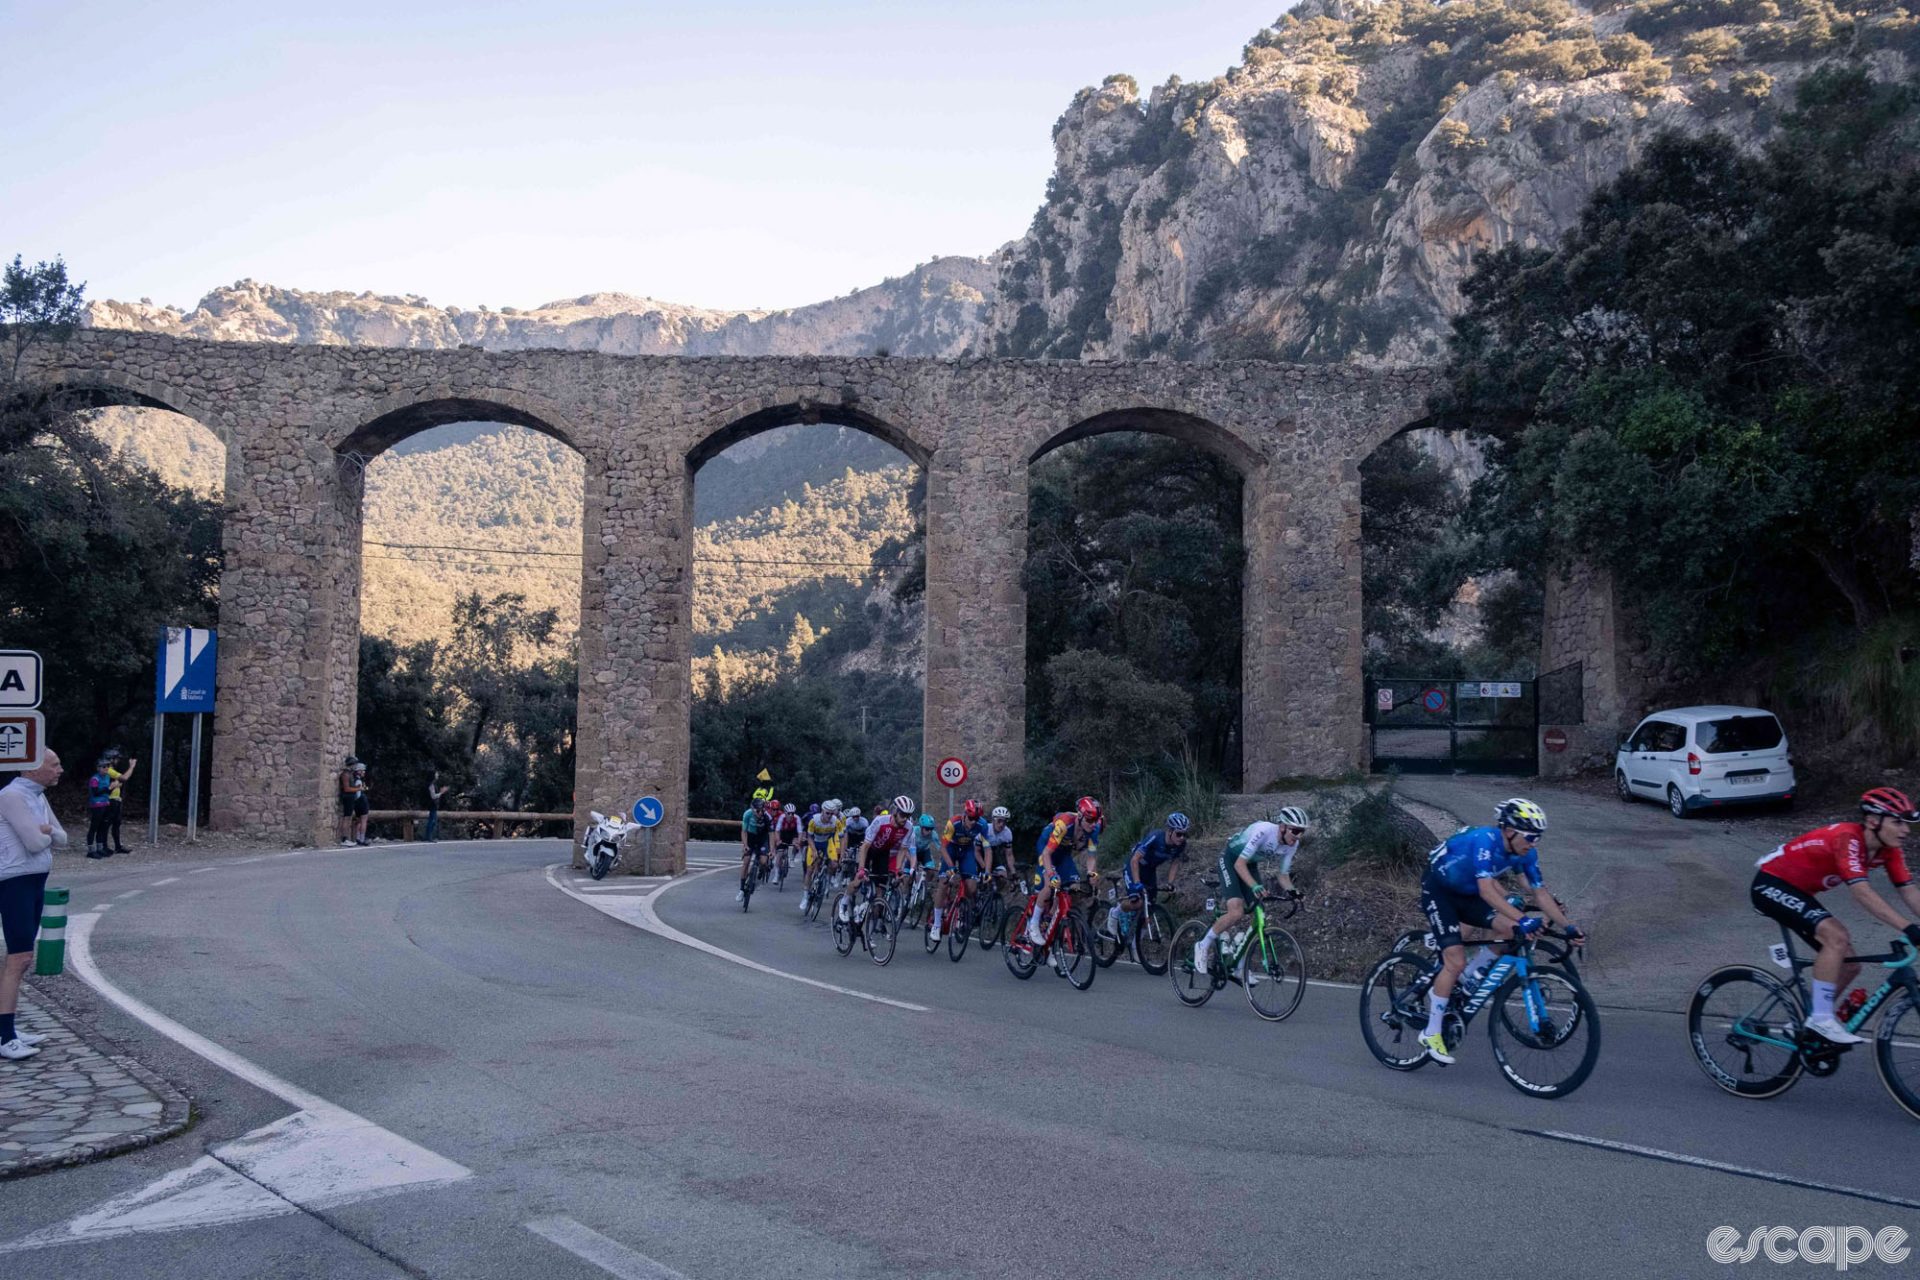 The pack races under a stone aquaduct on Mallorca.